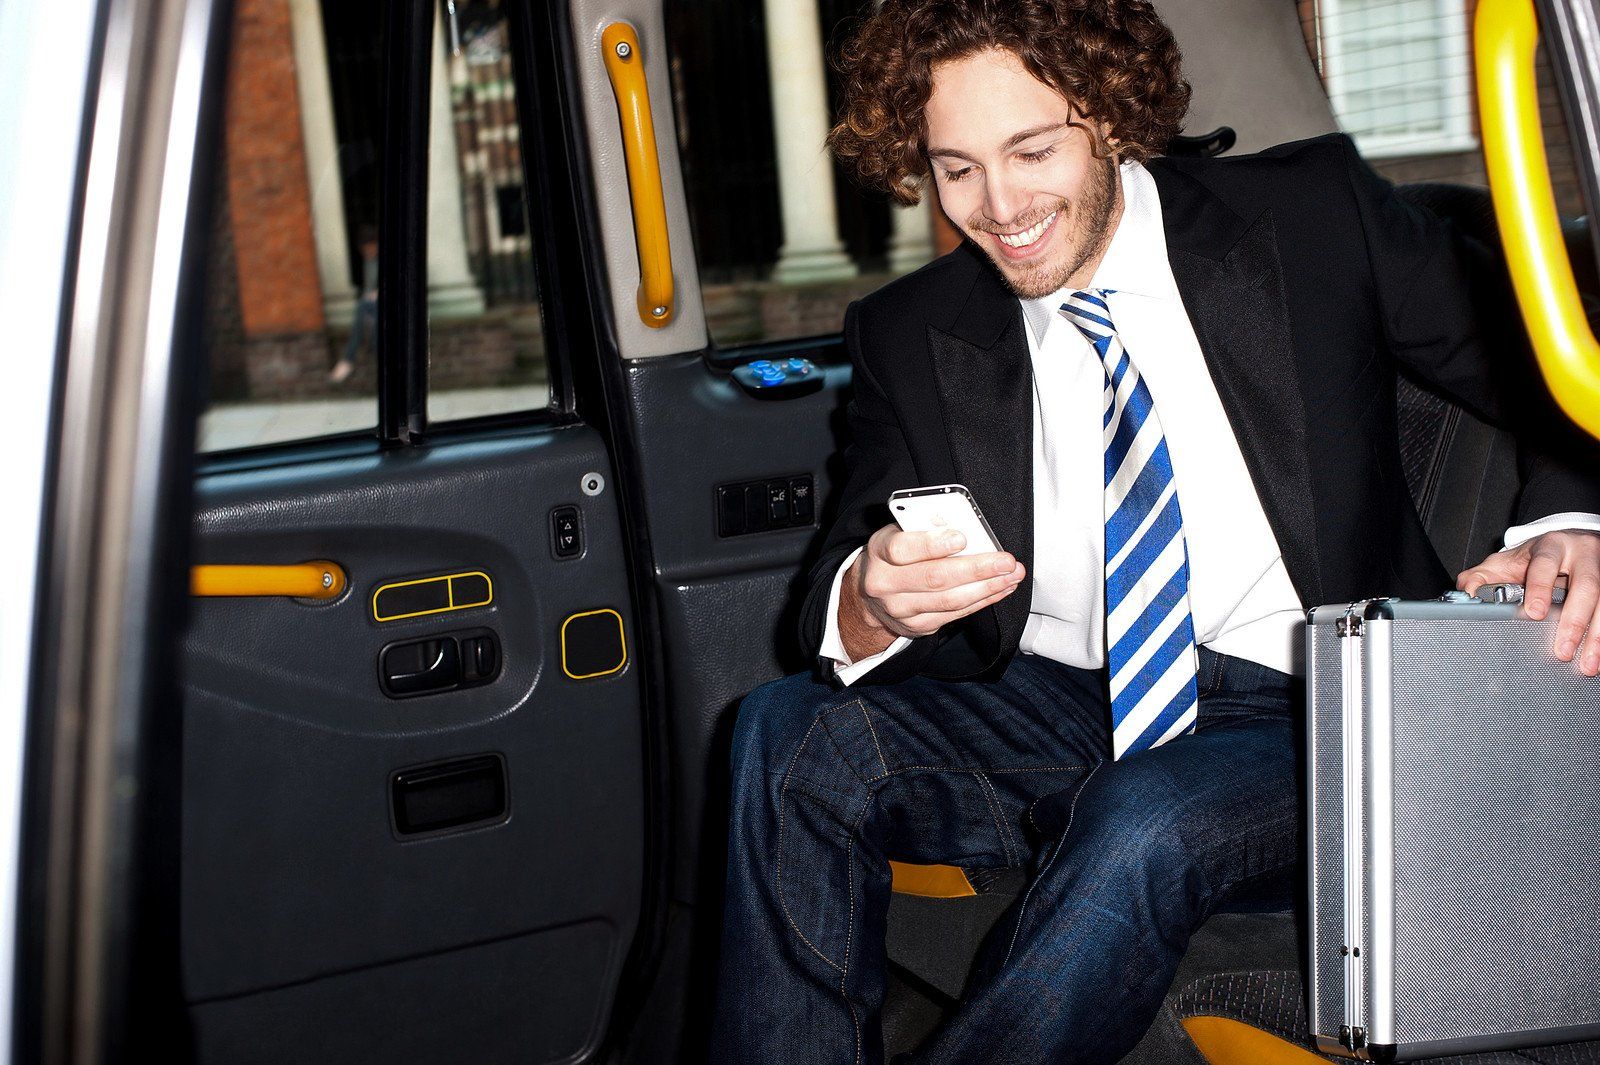 Young man in suit looking at cellphone while riding taxi.